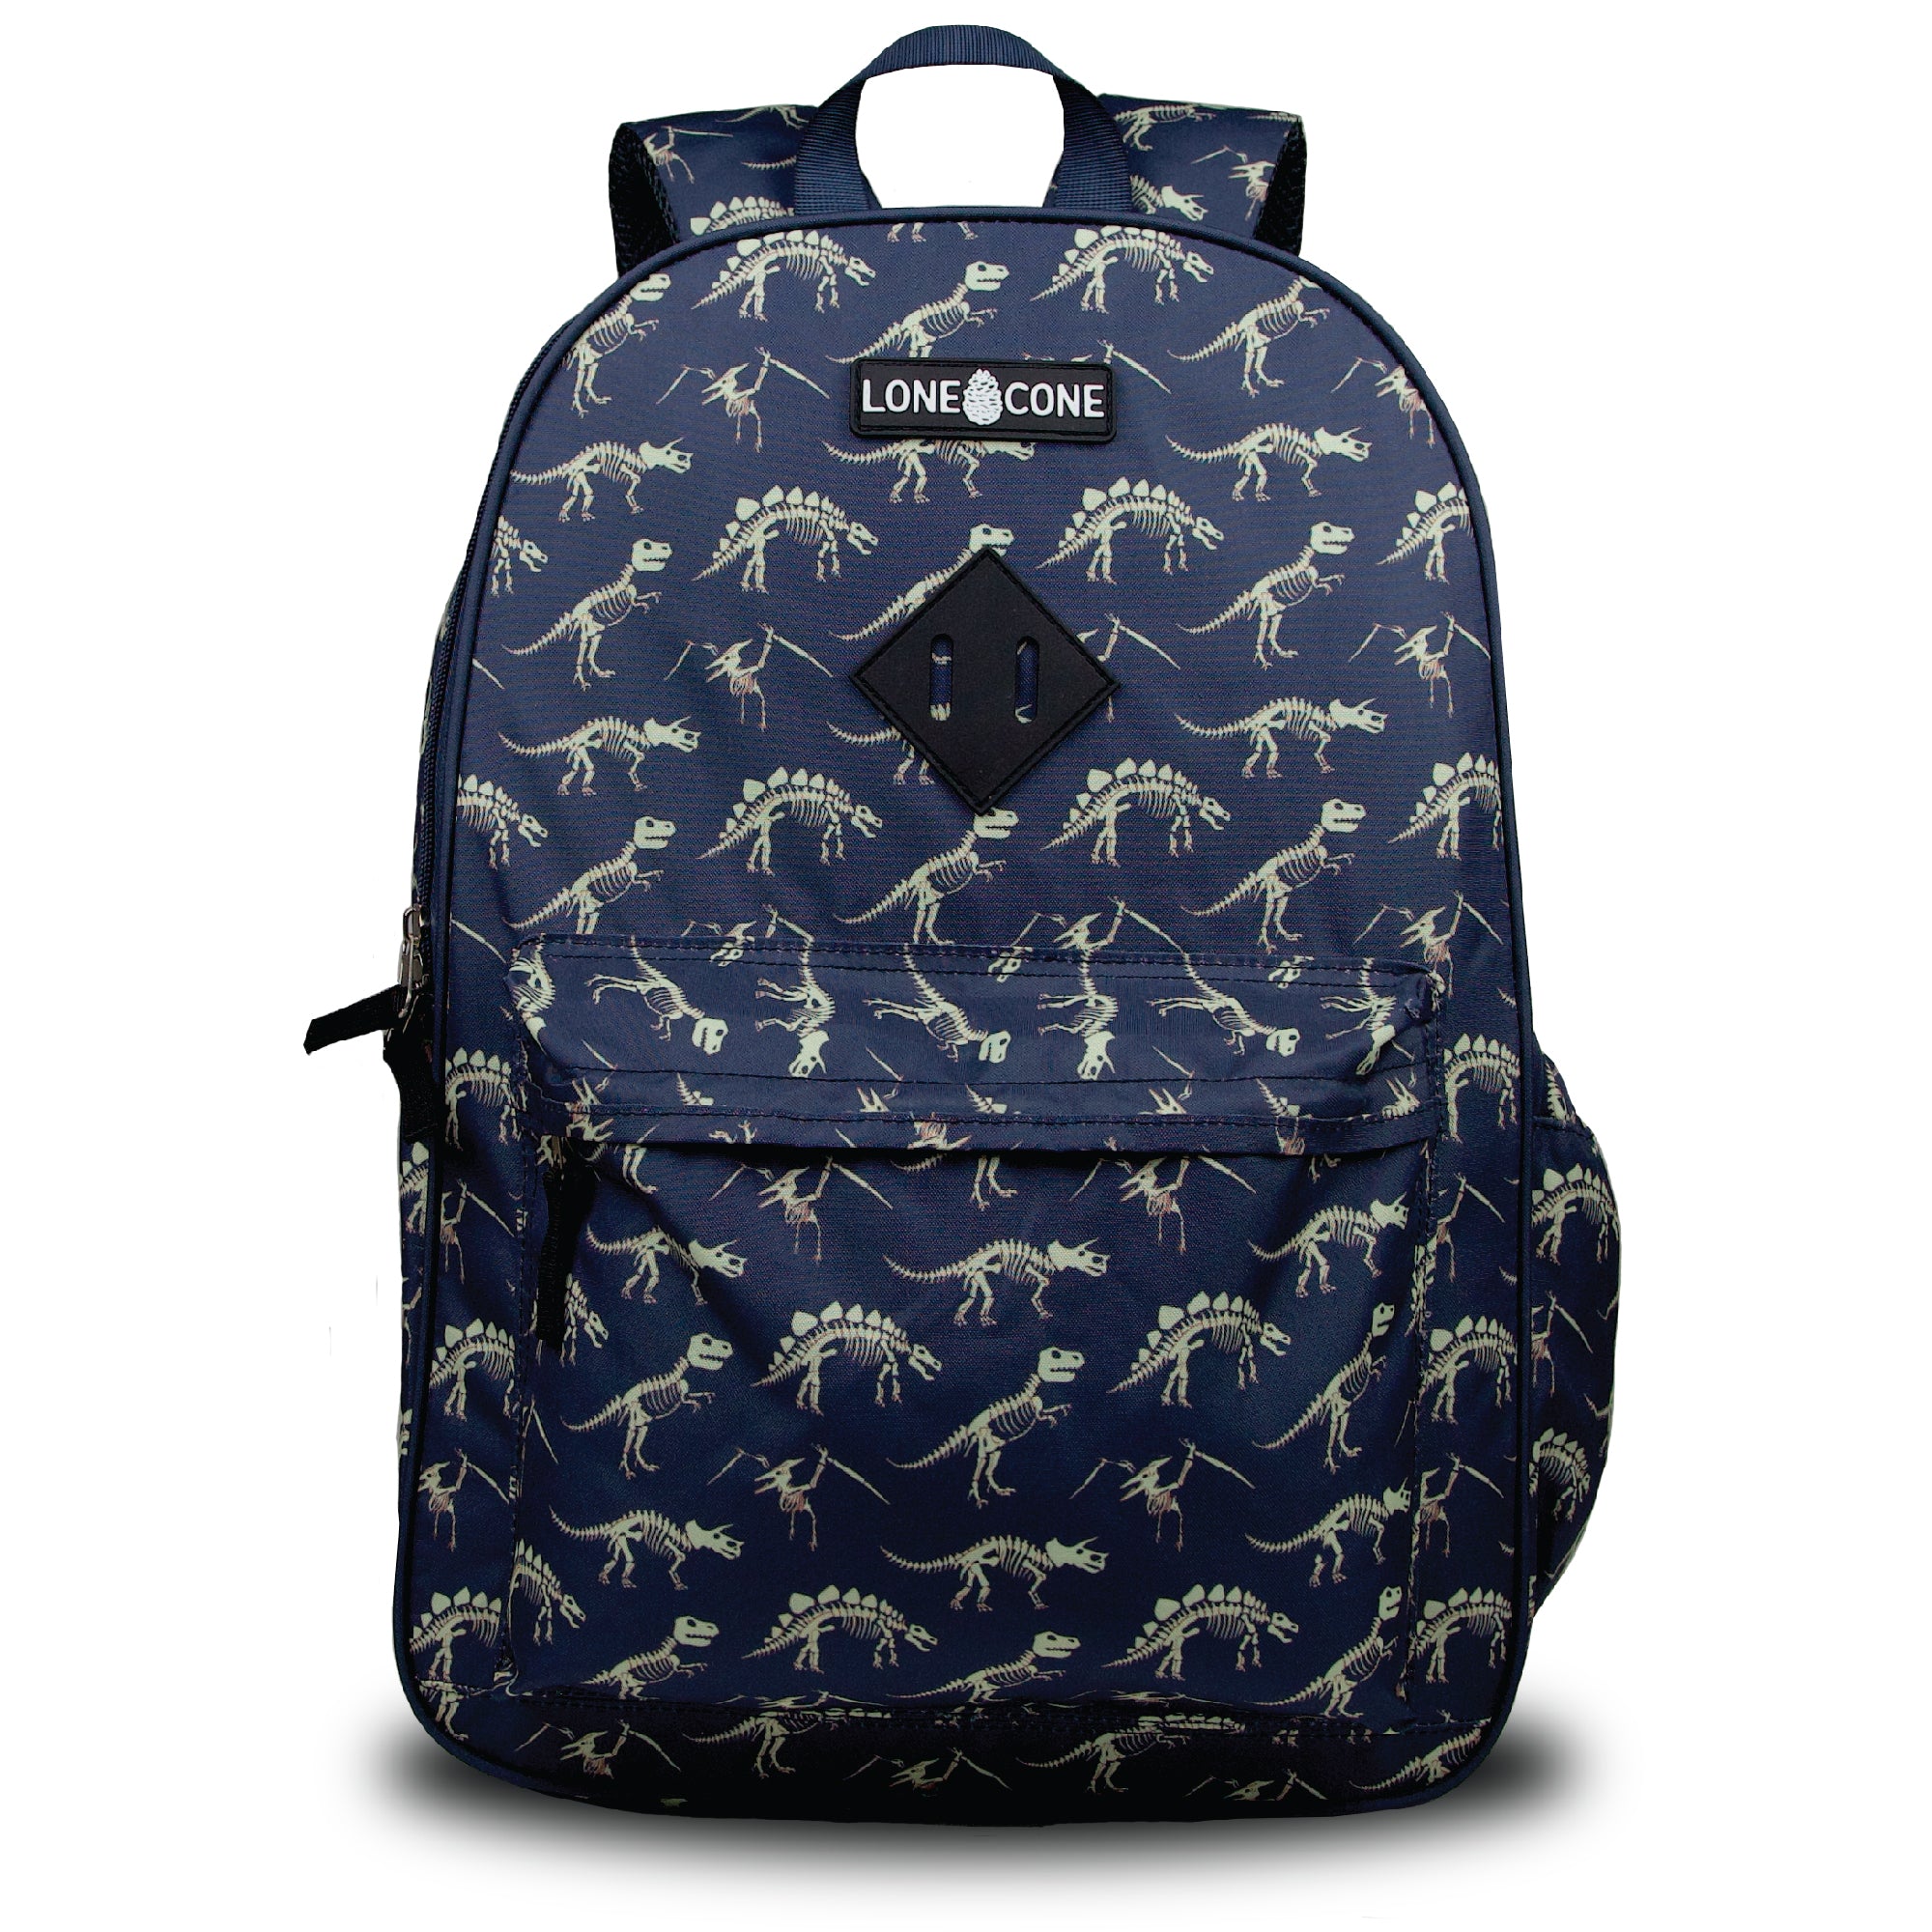 LONECONE No Bones About It 17" Backpack